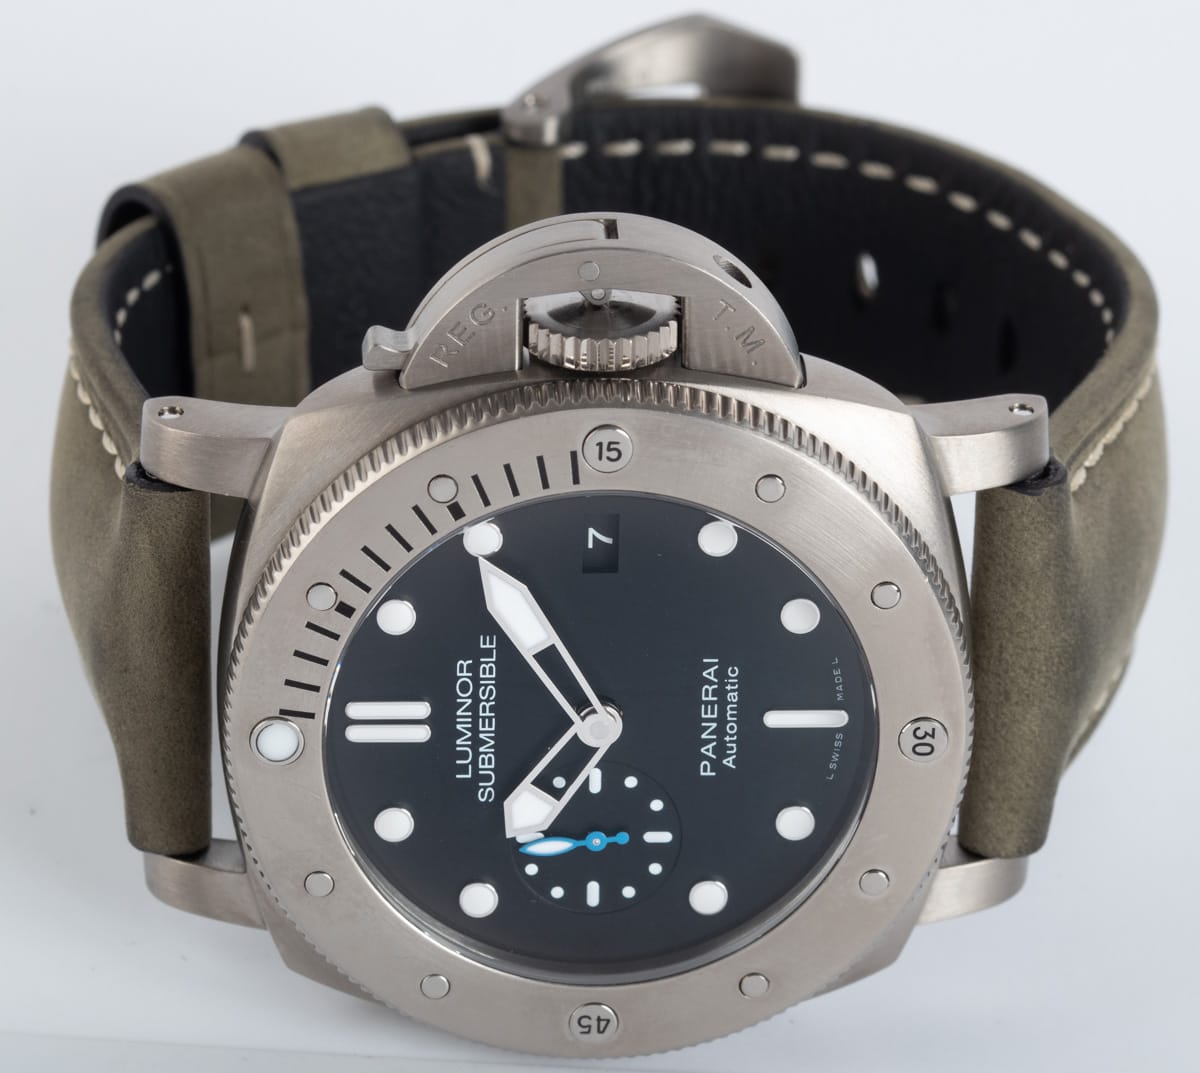 Front View of Luminor Submersible 1950 3 Days Titanio